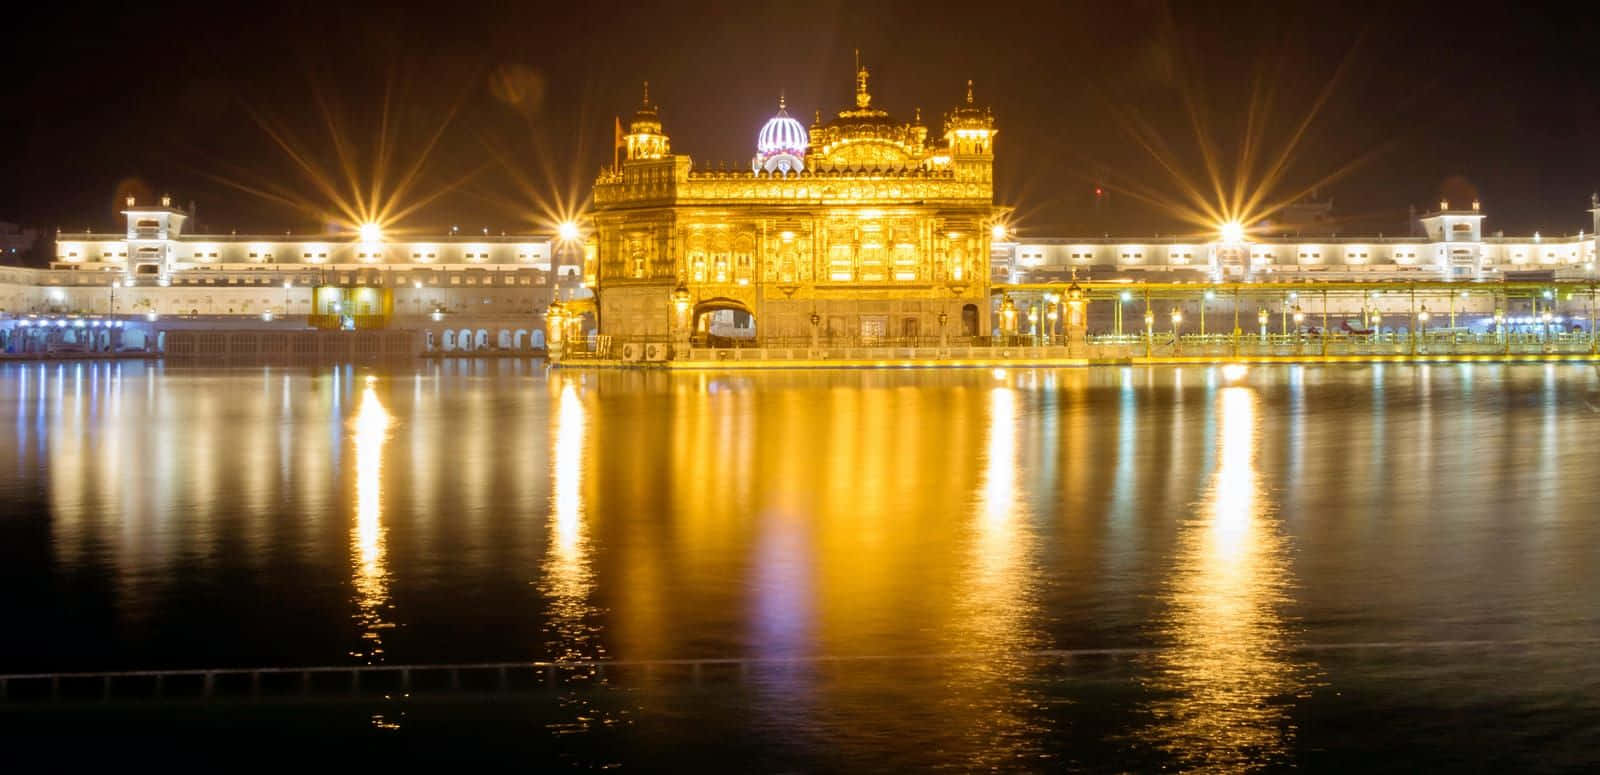 Majestic view of the illuminated Golden Temple in Amritsar, India at night